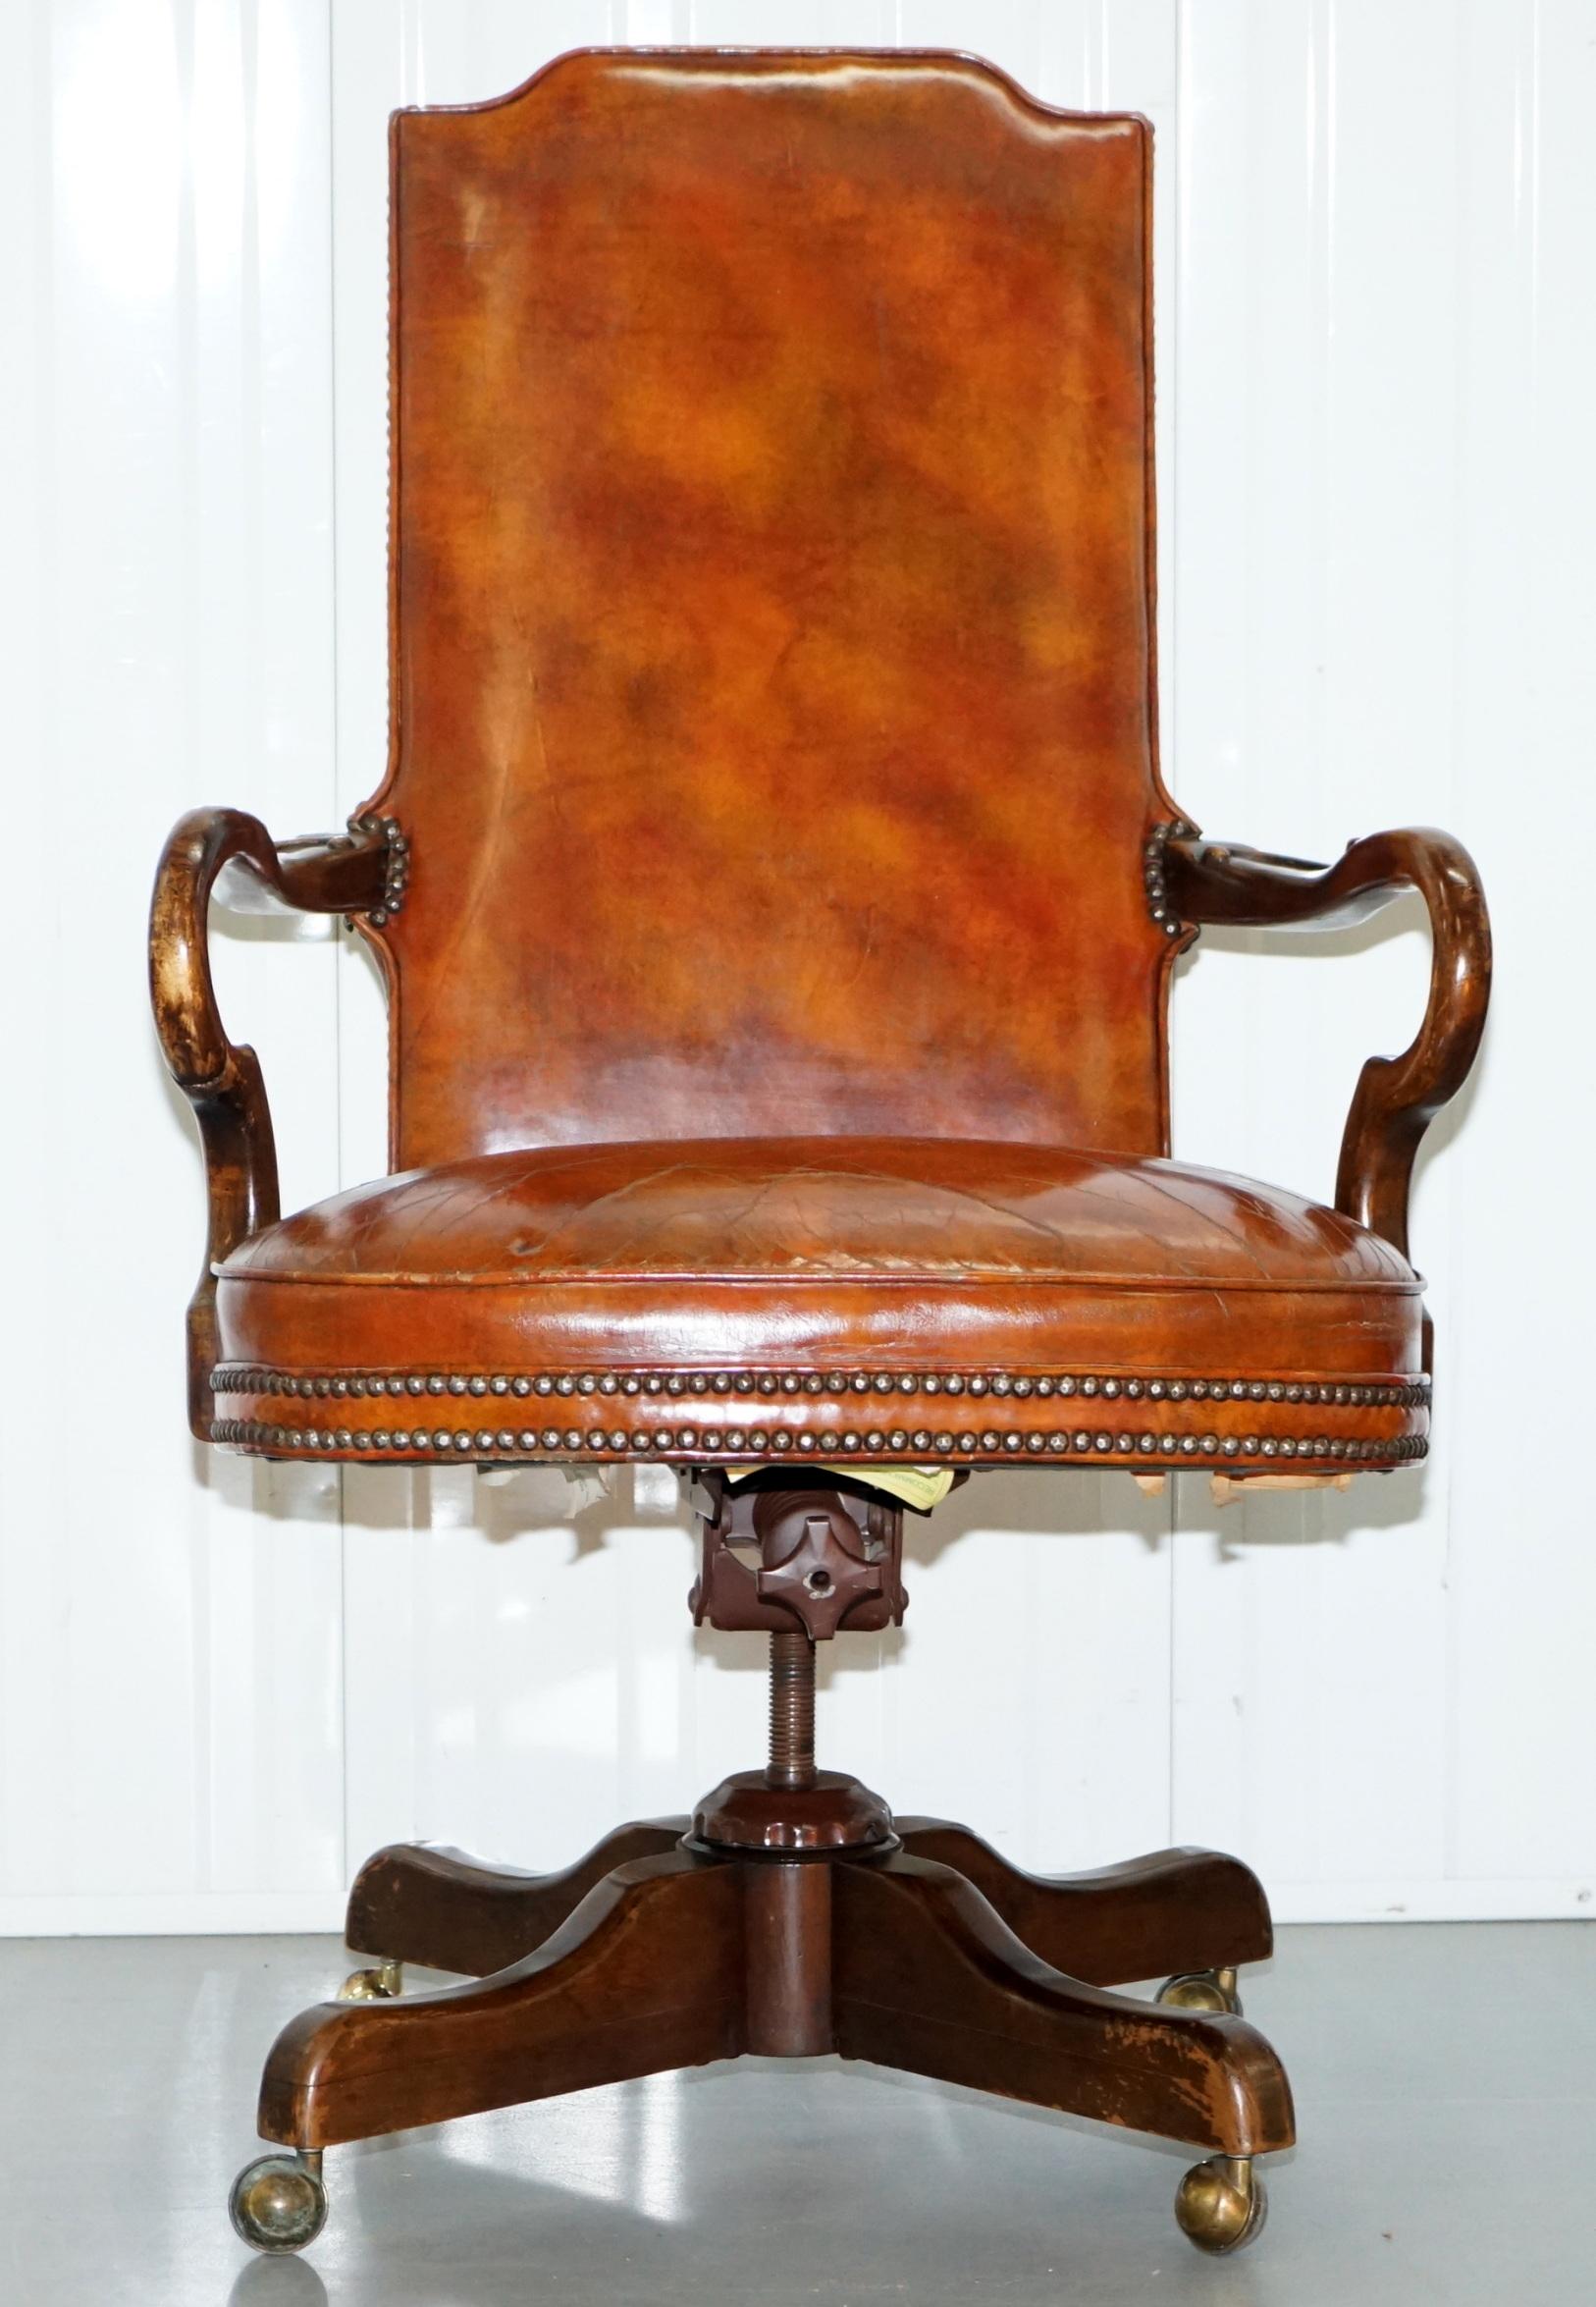 We are delighted to offer for sale this lovely hand dyed Century Chair Company brown leather directors office armchair. 

A very good looking well made and decorative office chair, it's exceptionally comfortable, has a nice easy to use tilt